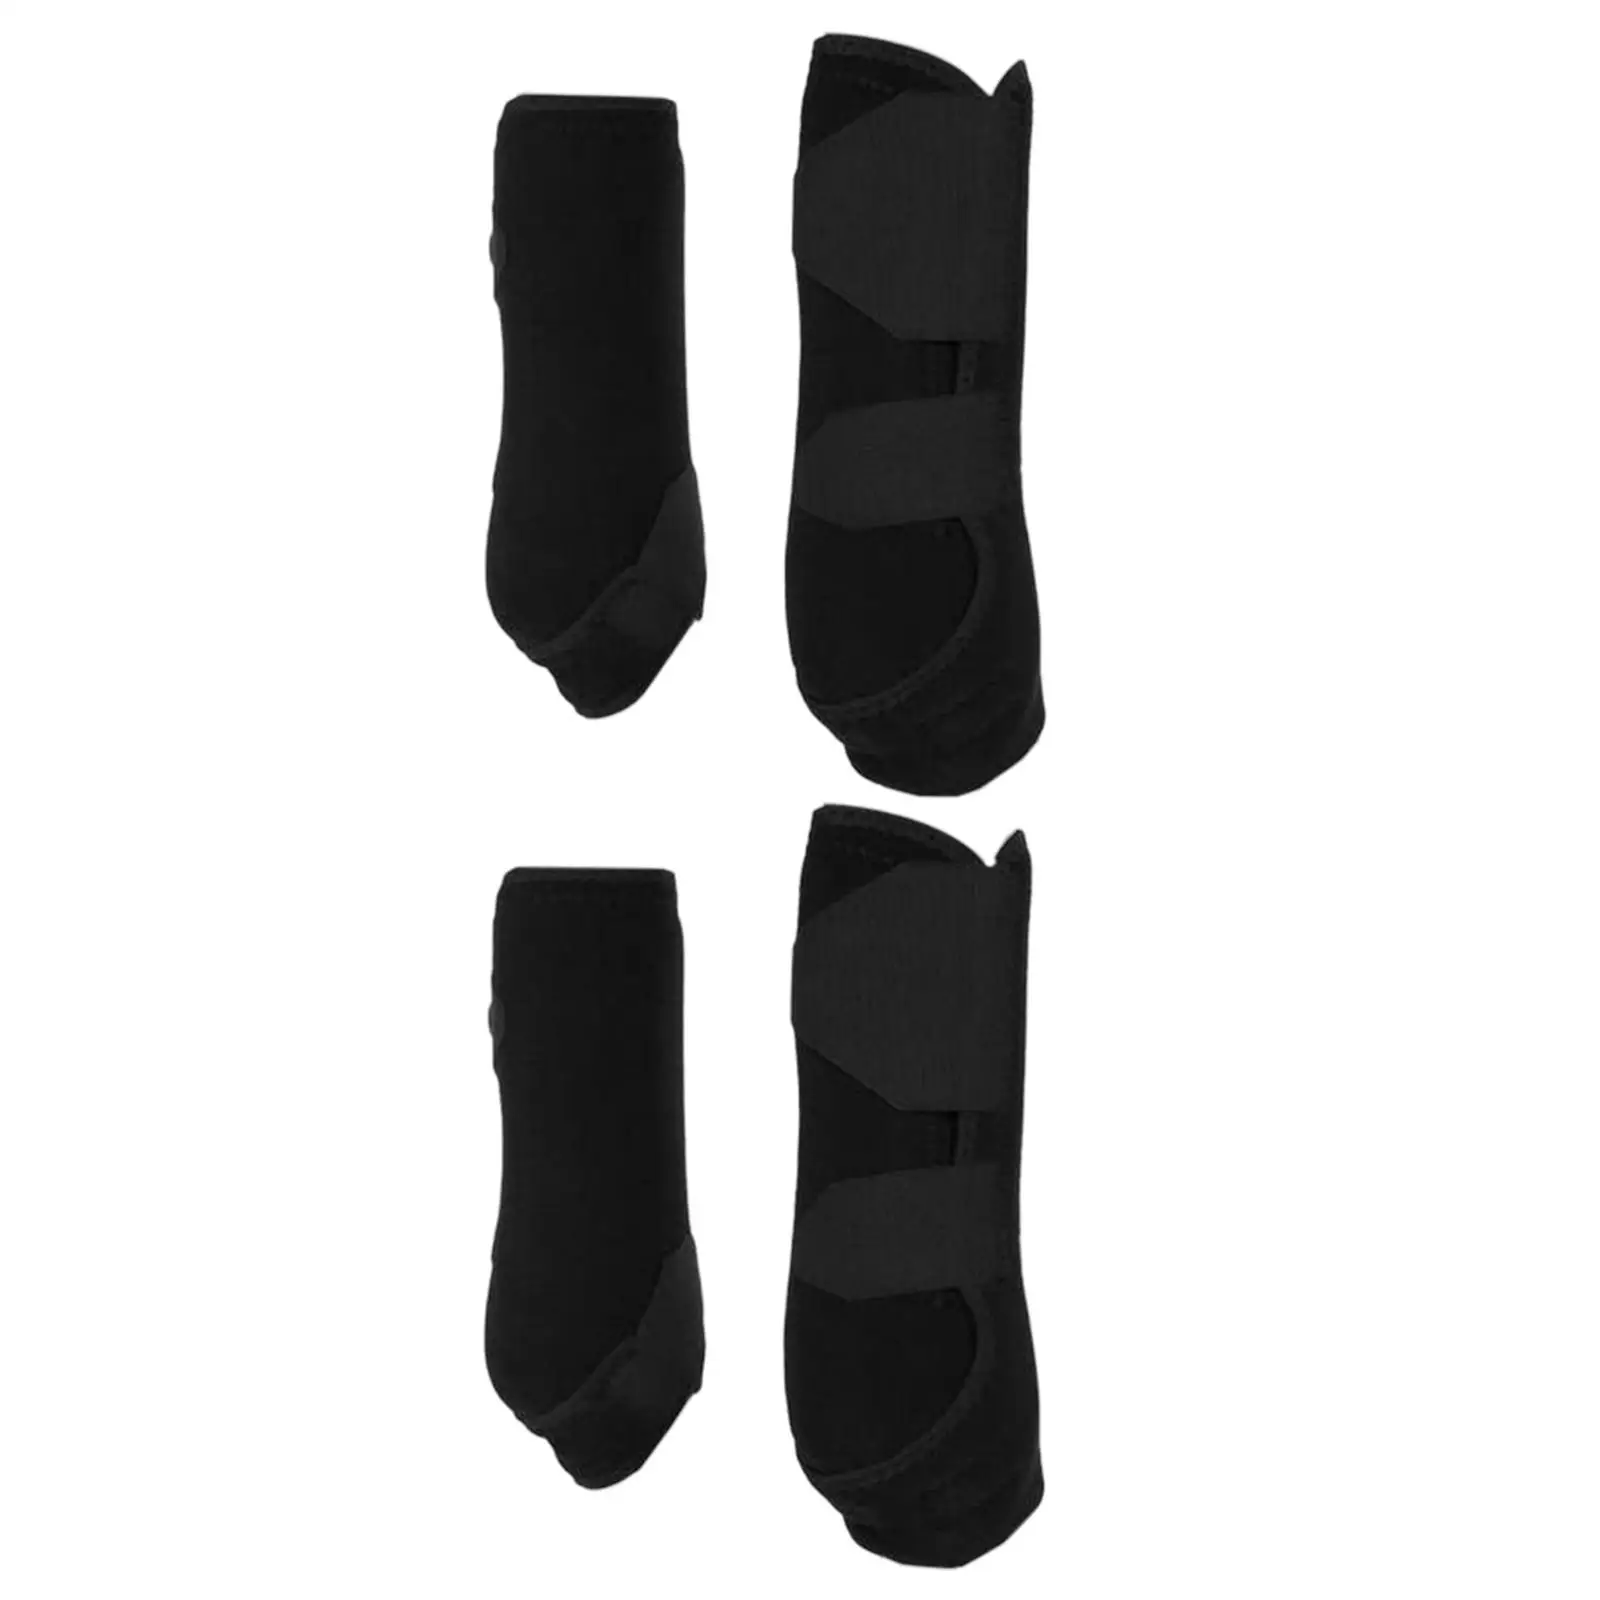 4Pcs Horse Boots Leg Wraps Shockproof Protector Tendon Protection Front Hind Legs Guard for Jumping Equestrian Accessories